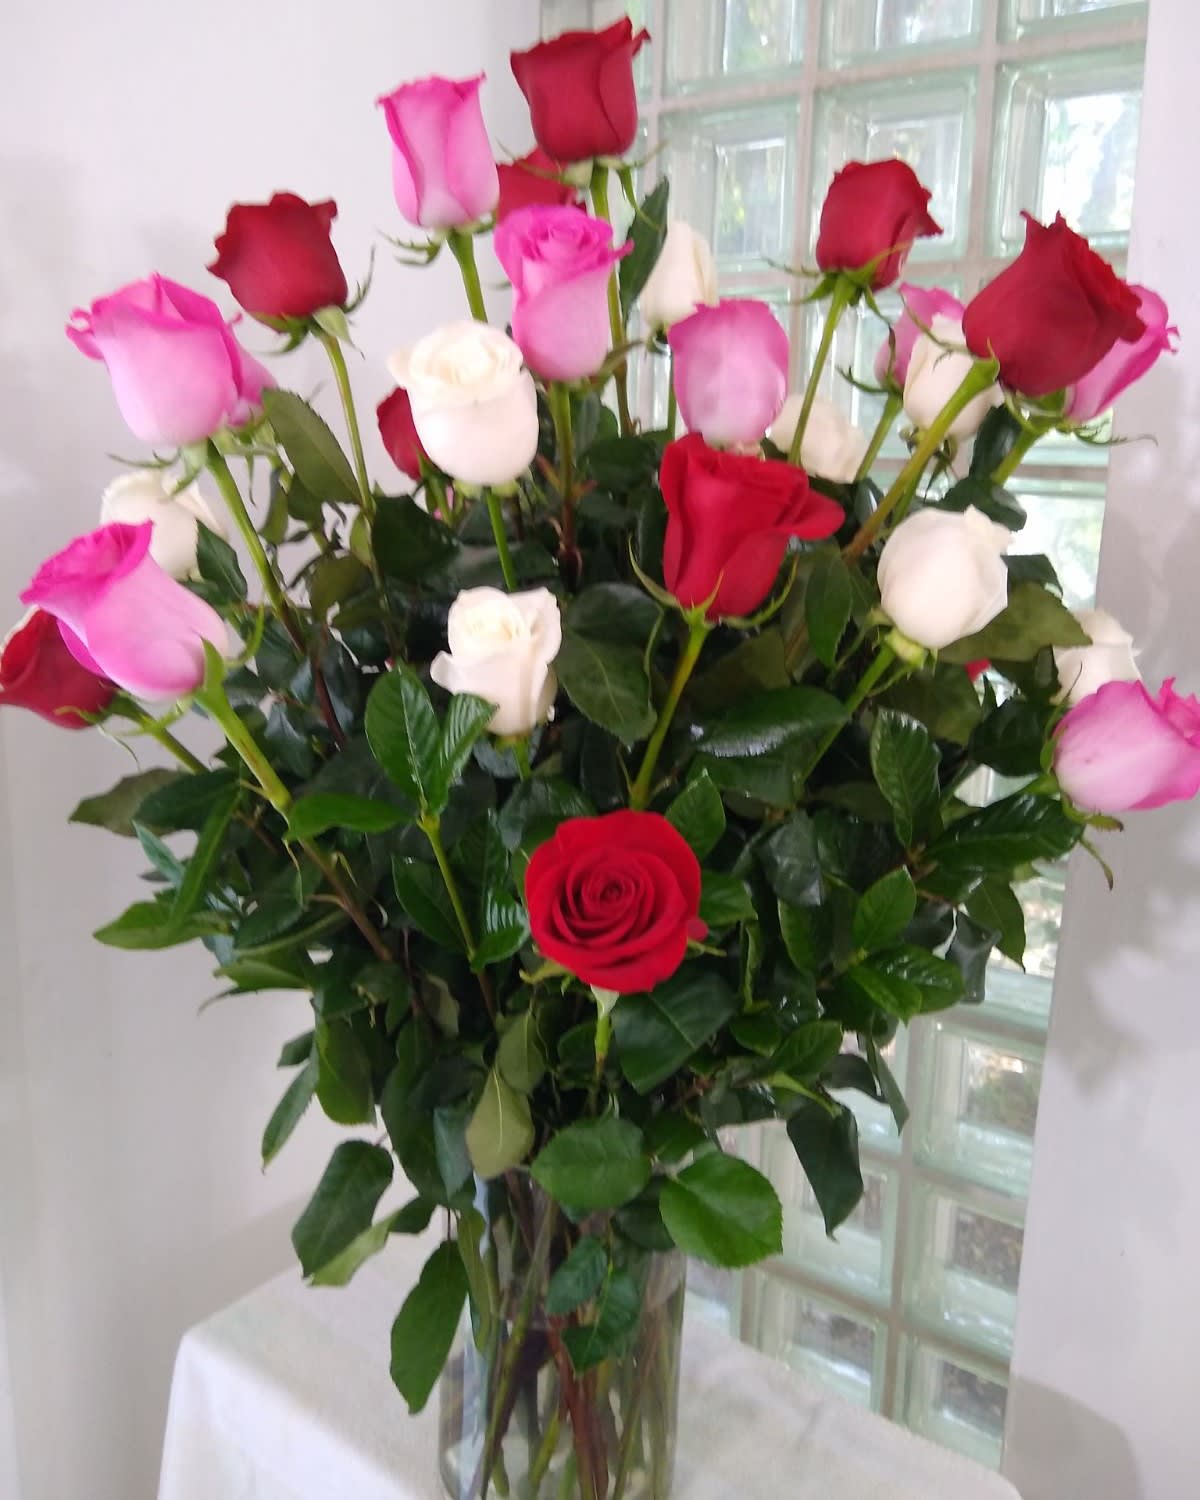 Romantic Roses - Roses mean romance.  But what makes these roses so extra romantic?   Men tend to red and other primary colors.   Women tend to like pinks and other pastel colors.   You put them together with a little extra white to give it a white hot spark and you get Romantic Roses!